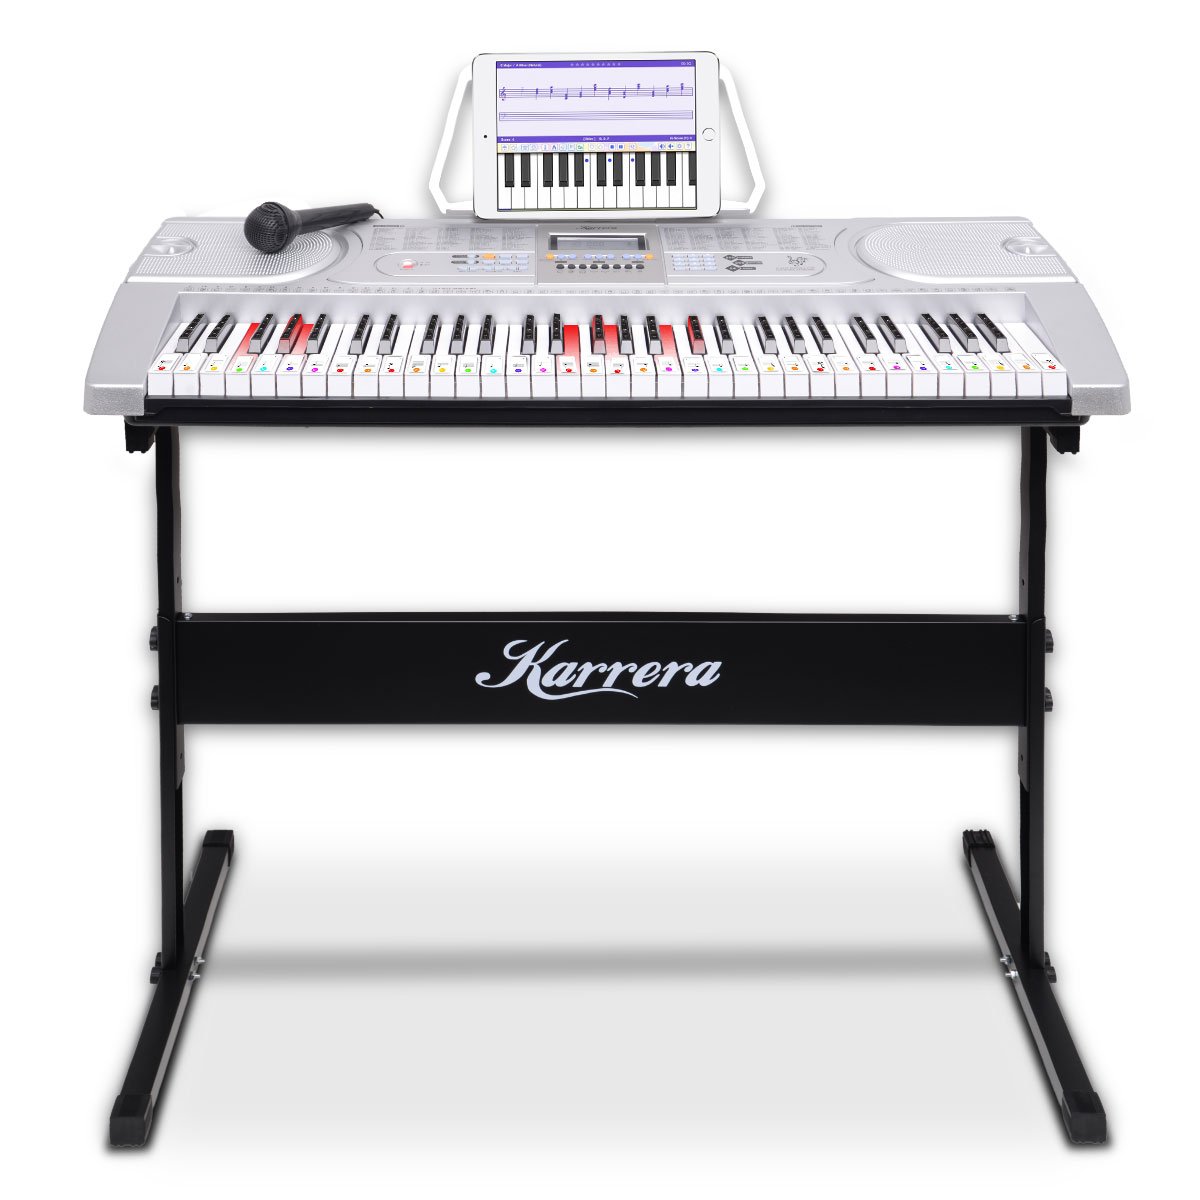 Karrera 61 Keys Electronic LED Keyboard Piano with Stand - Silver 1